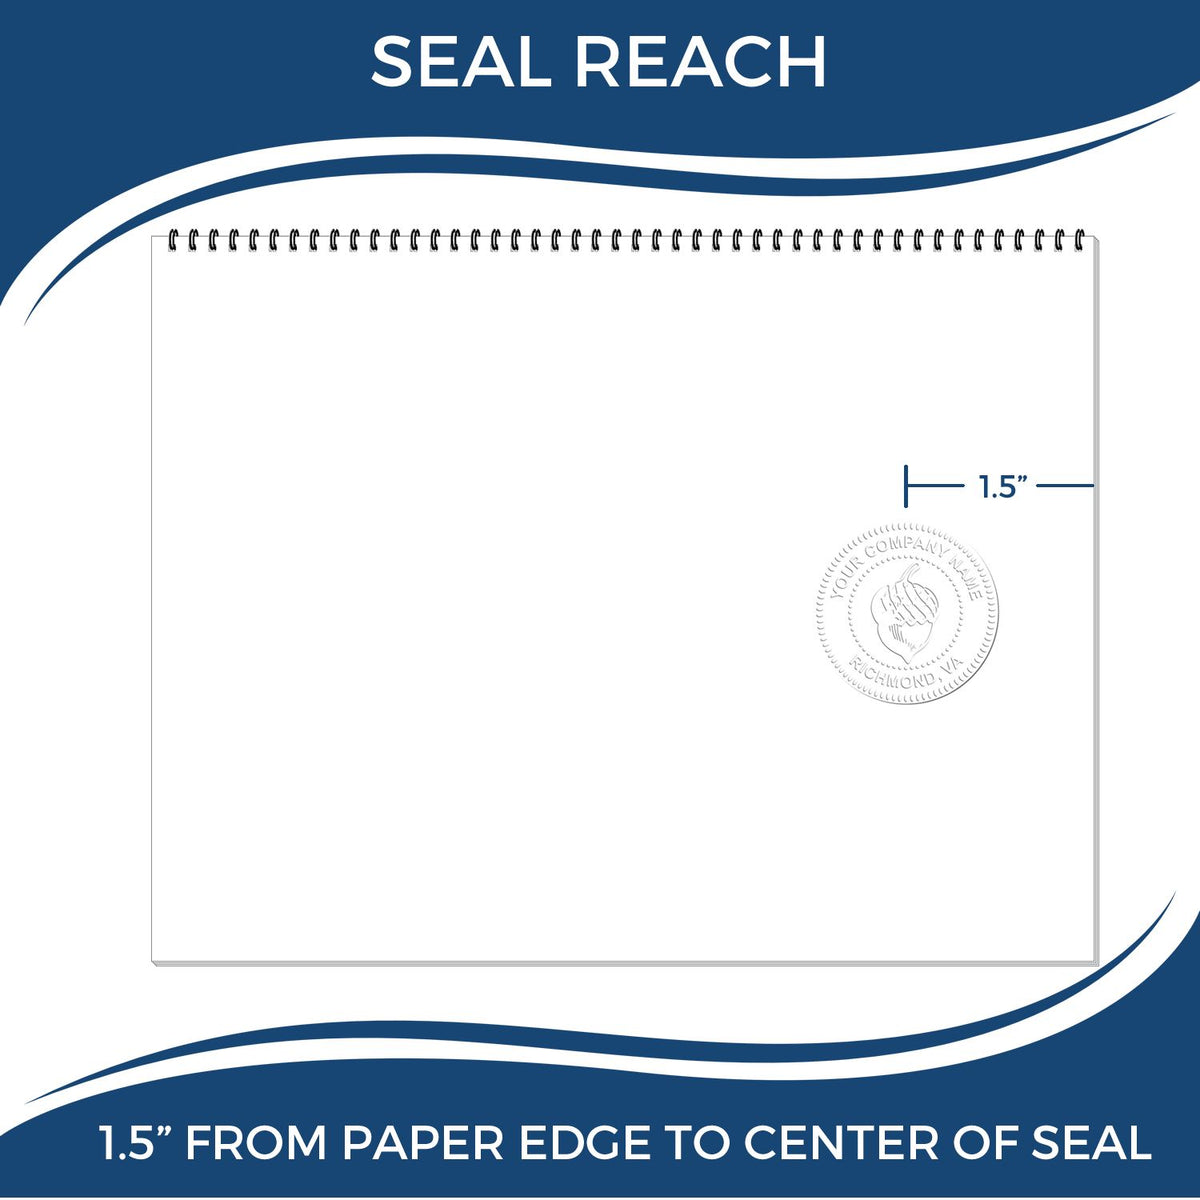 An infographic showing the seal reach which is represented by a ruler and a miniature seal image of the Soft Pocket Florida Landscape Architect Embosser